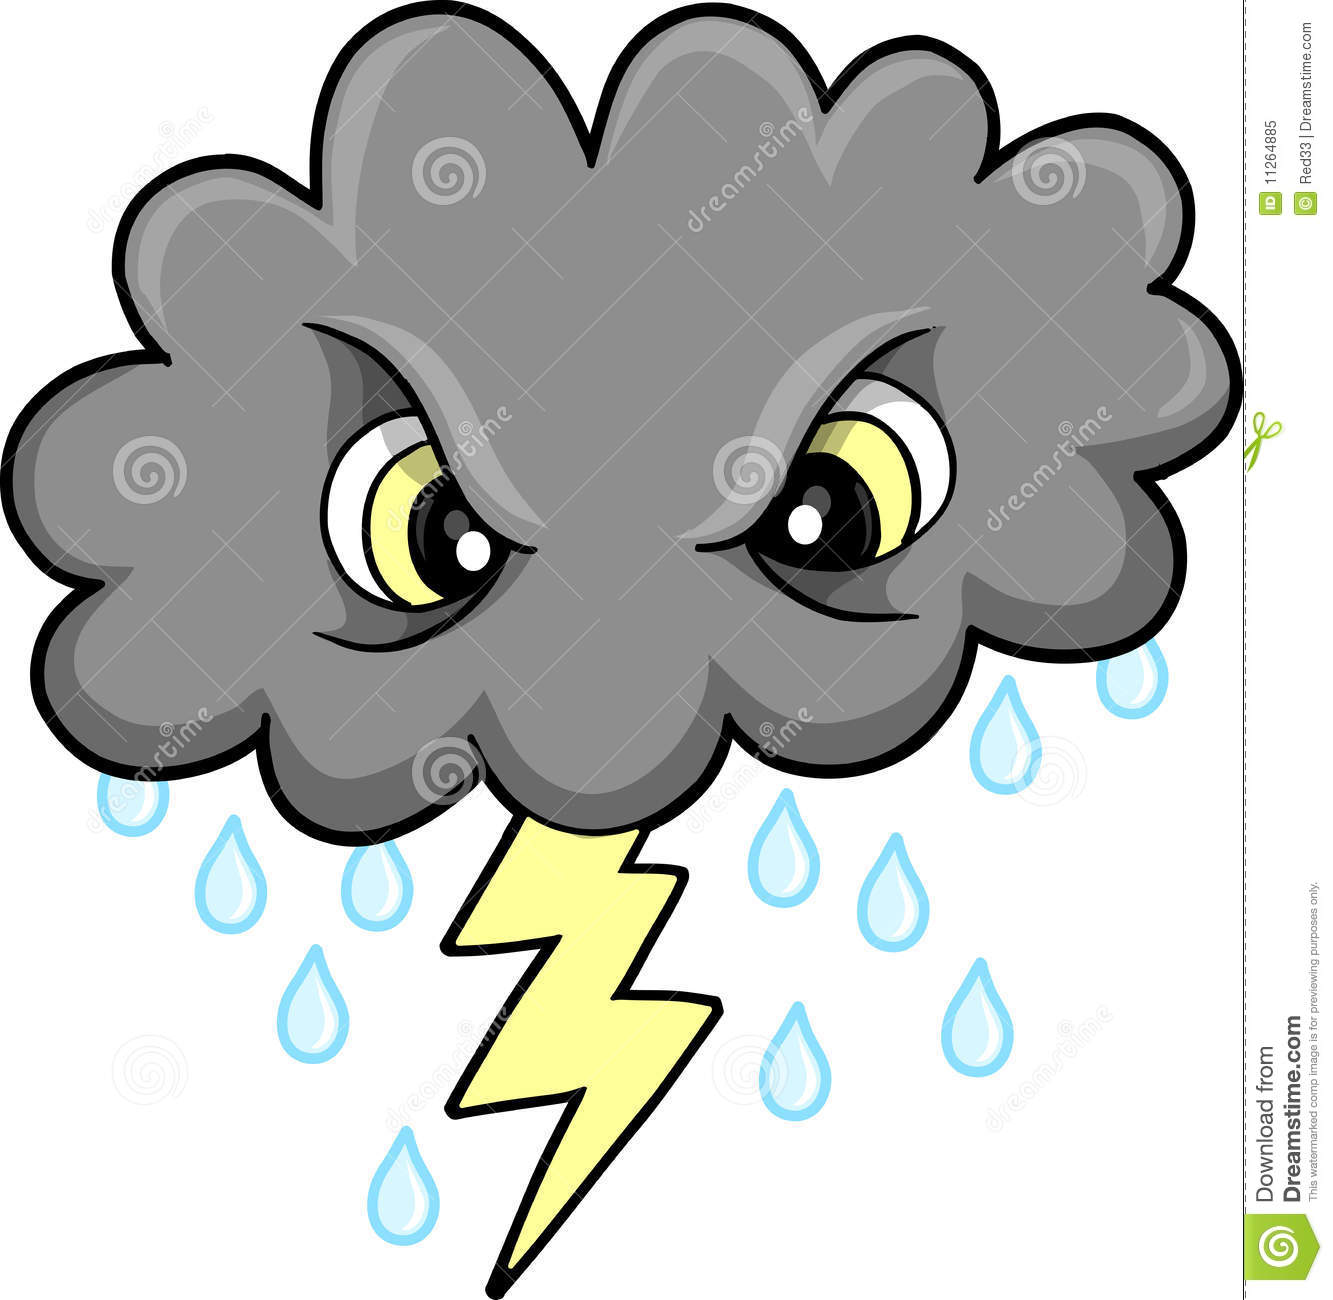 Thundercloud clipart - Clipground